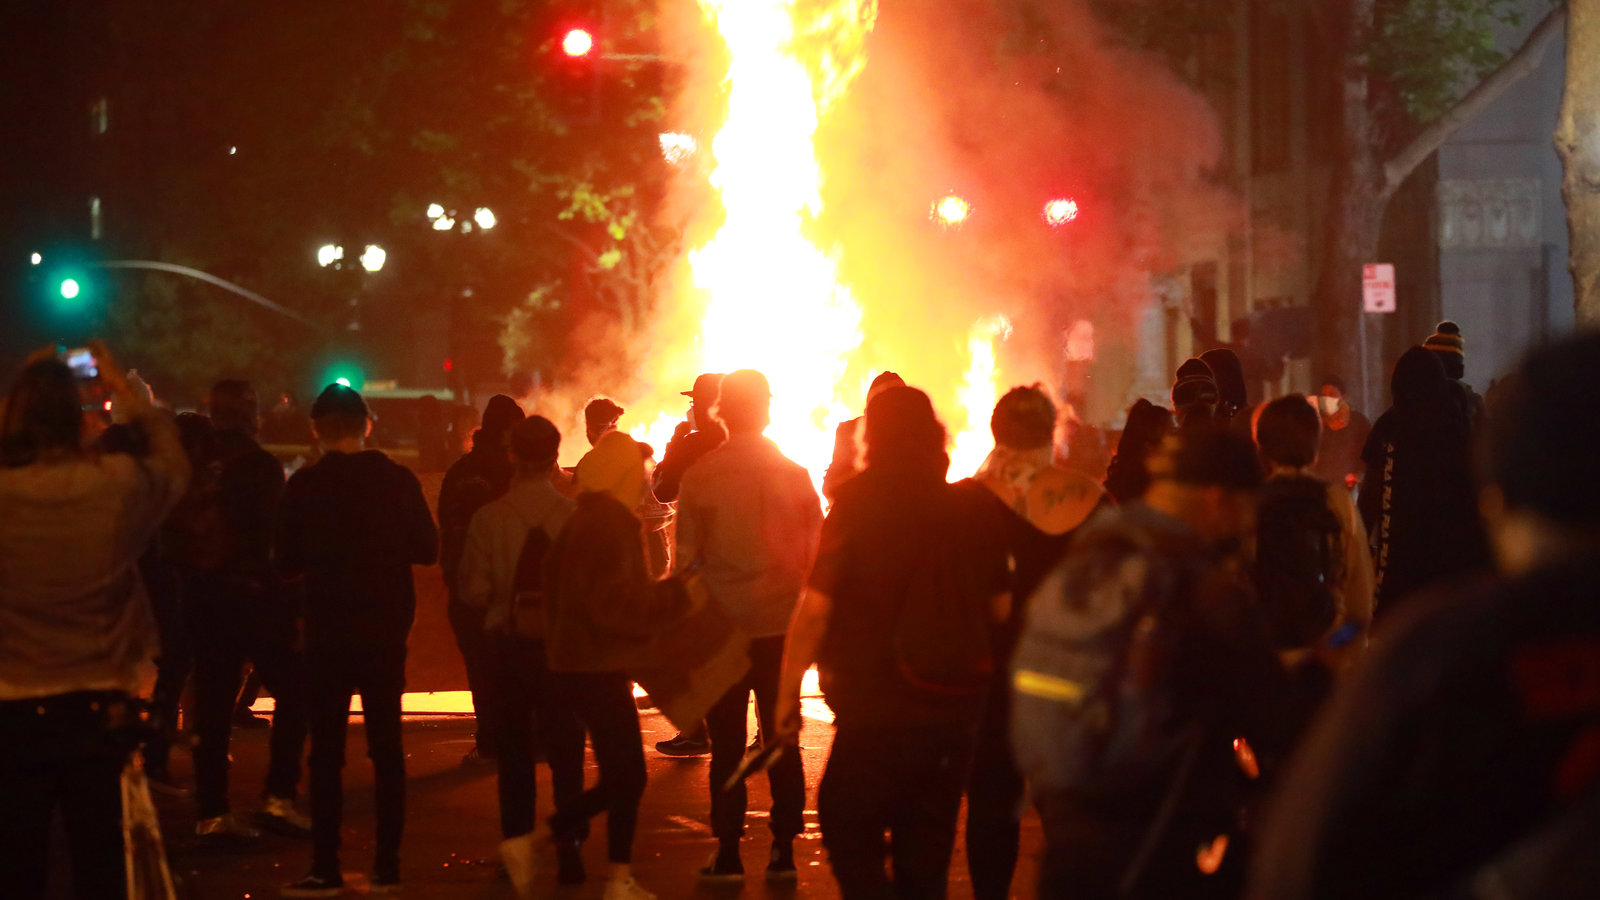 Richmond police say white supremacists acting like protestors ignited riots